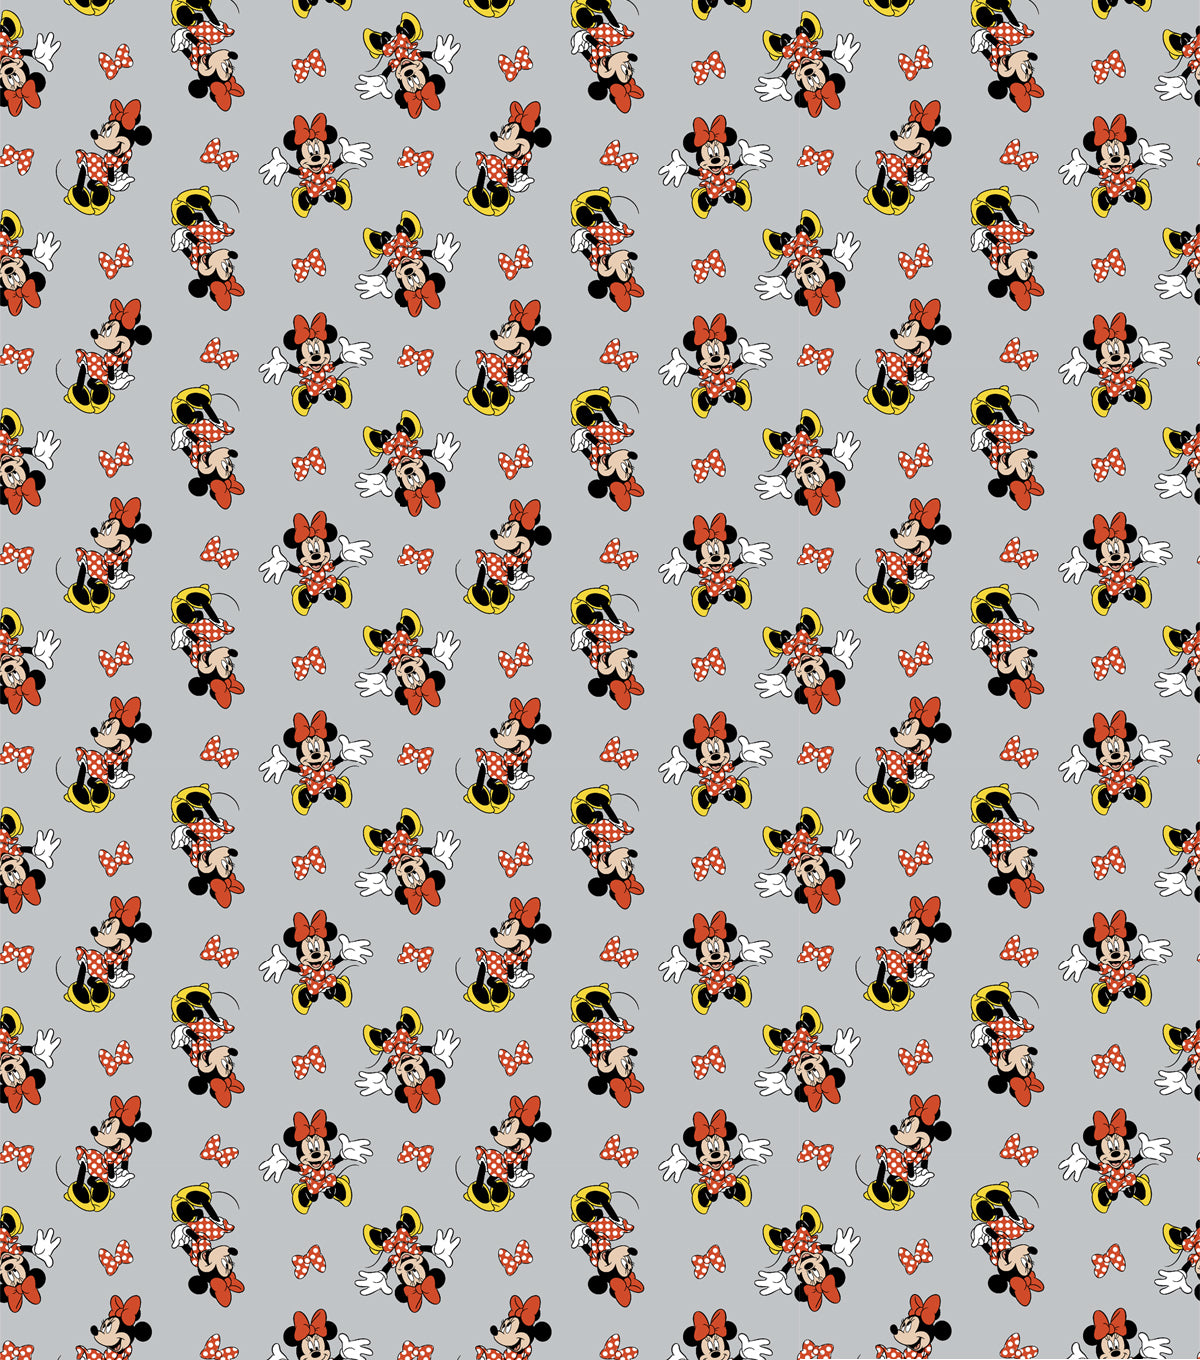 Disney Minnie Mouse Fun With Polka Dots Cotton Fabric